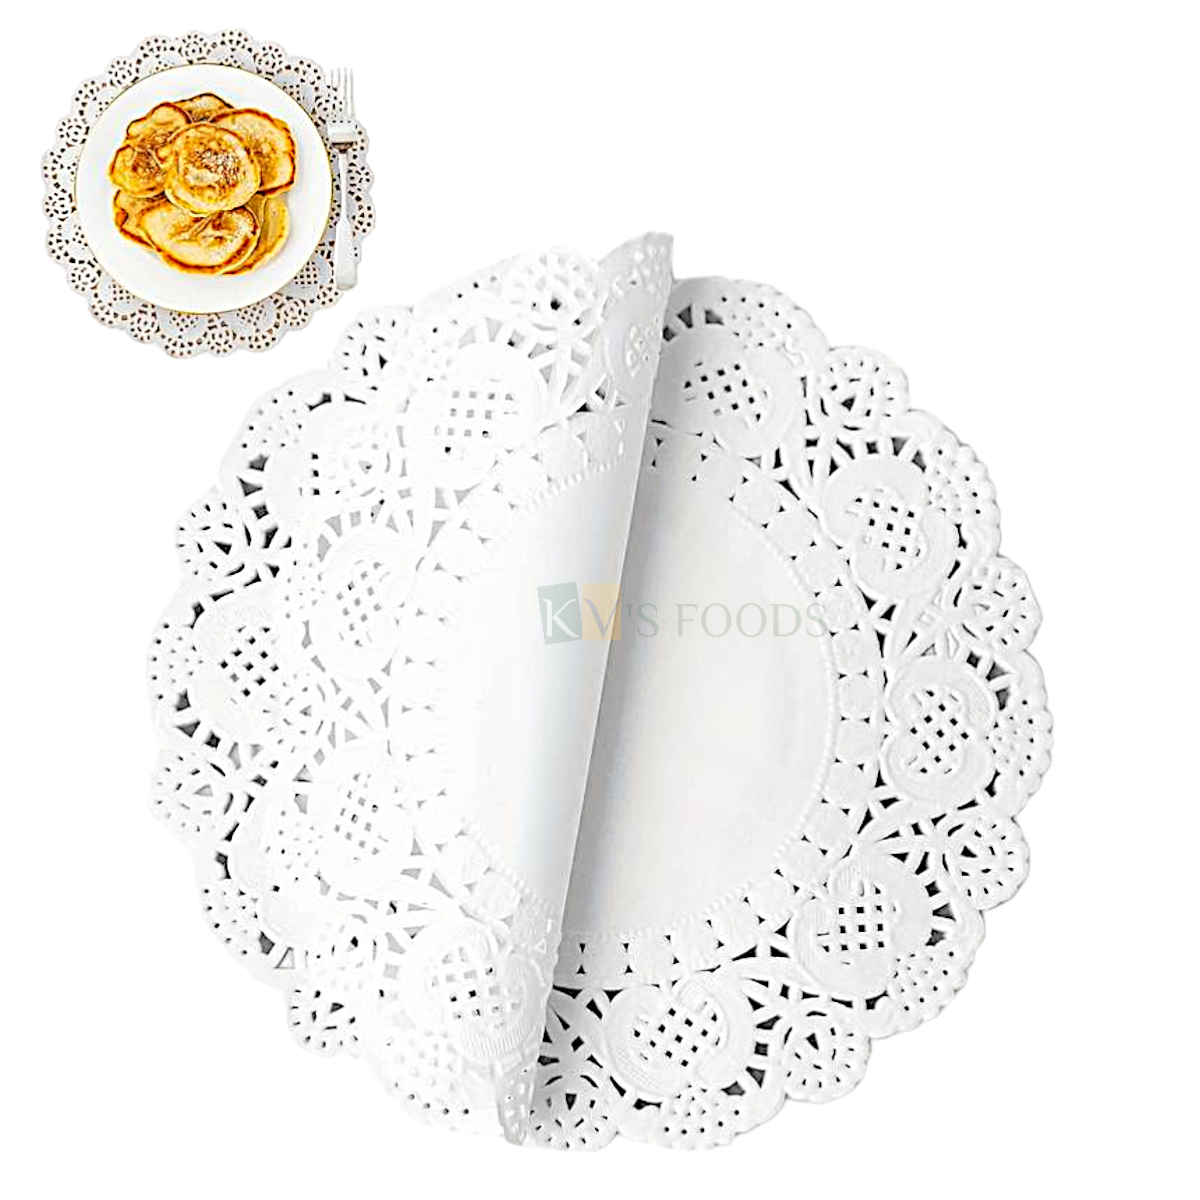 1 Packet White Round Doilies Laces Paper 250 Nos. Size 10.5 Inches, Disposable Doyleys Paper for Cakes Finger Food Snacks, Muffins Cupcakes Dessert Pastries Birthday Party Weddings Oil Absorbing Paper